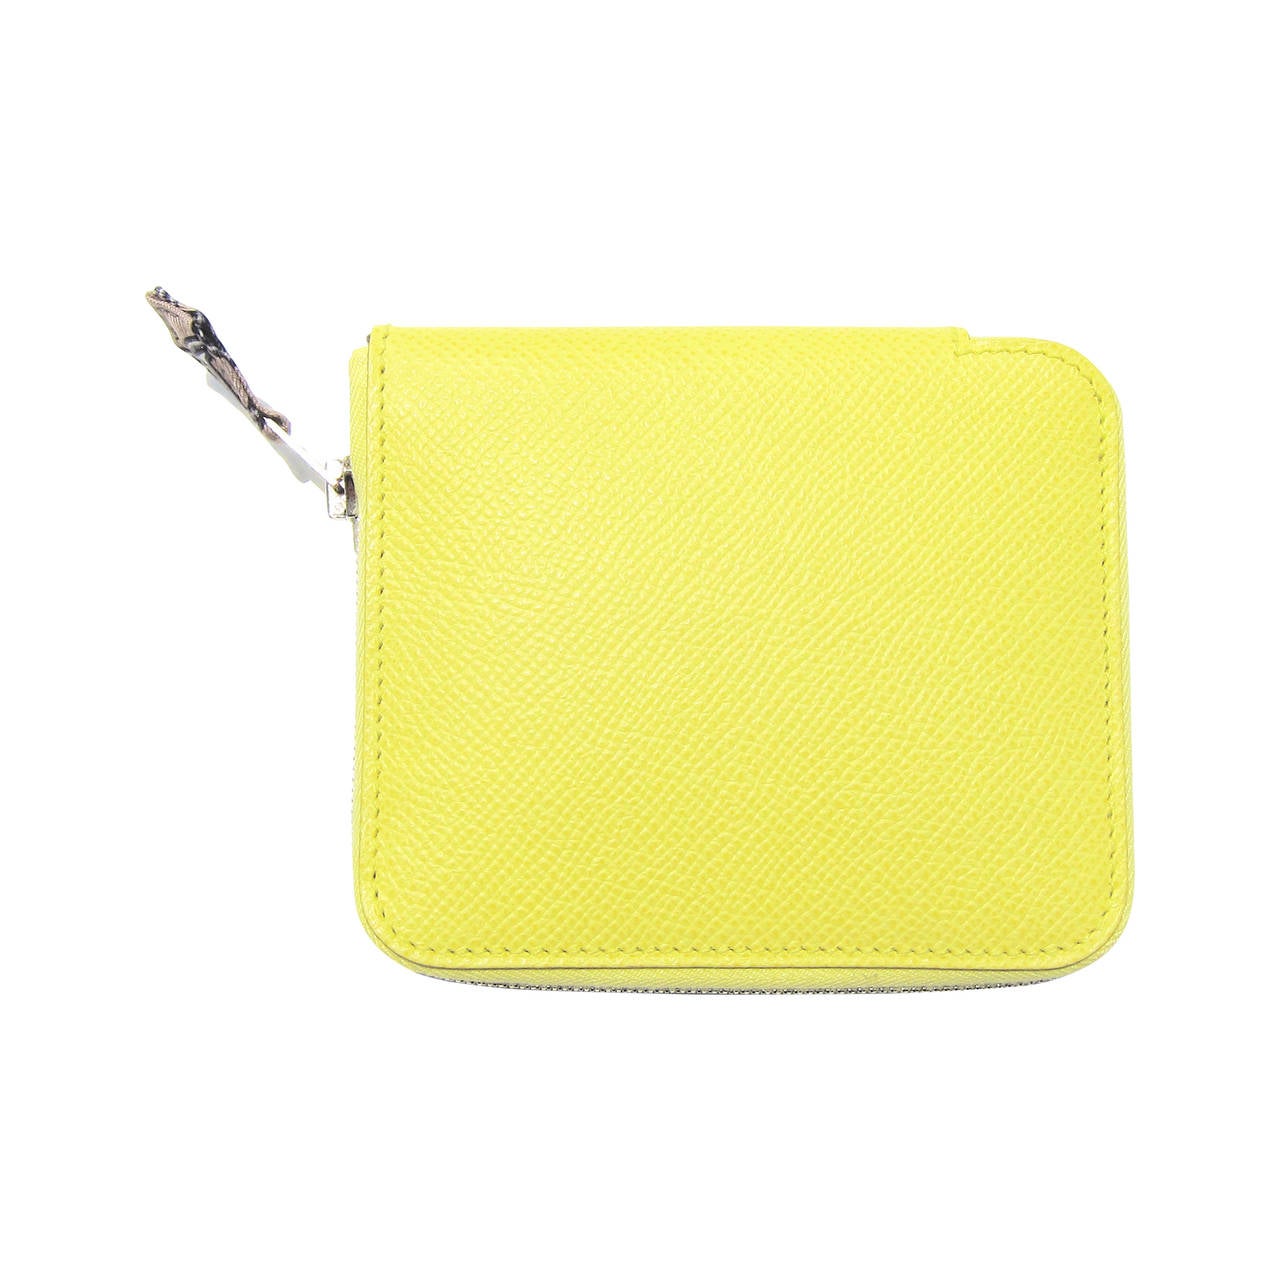 Hermes Soufre Neon Yellow Silk-in Azap Compact Epsom Leather Wallet